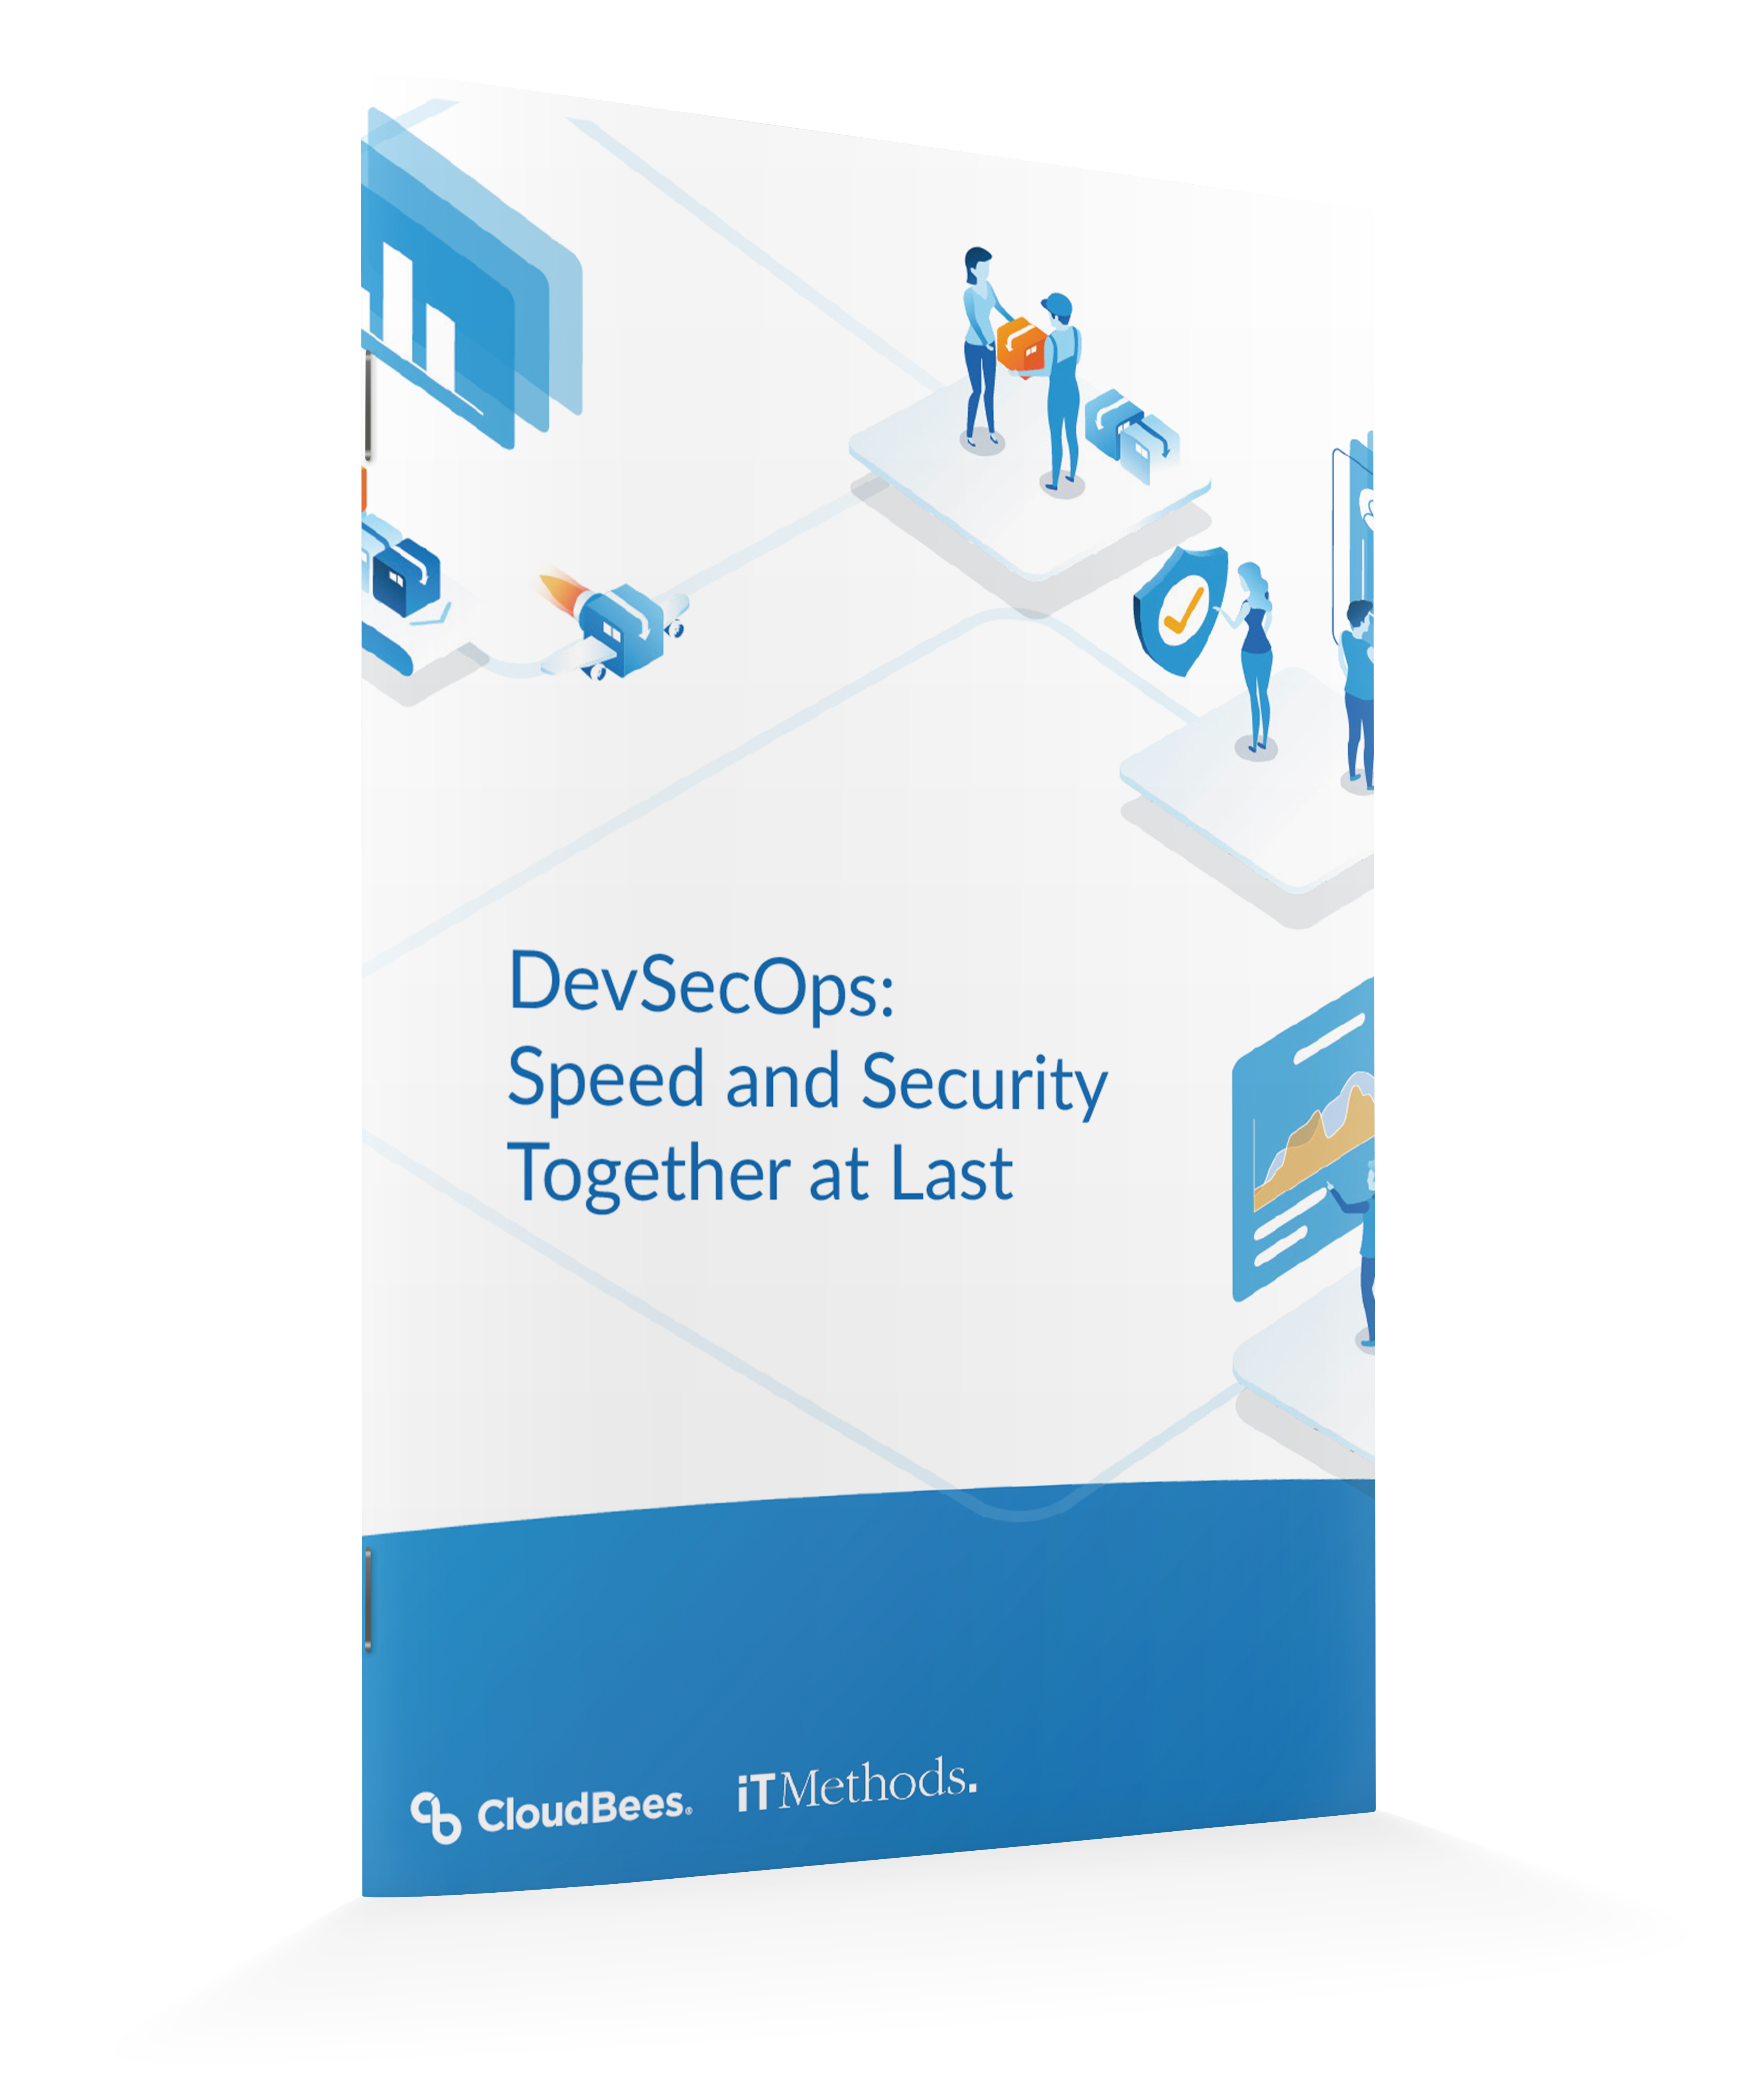 DevSecOps Speed And Security Together at Last